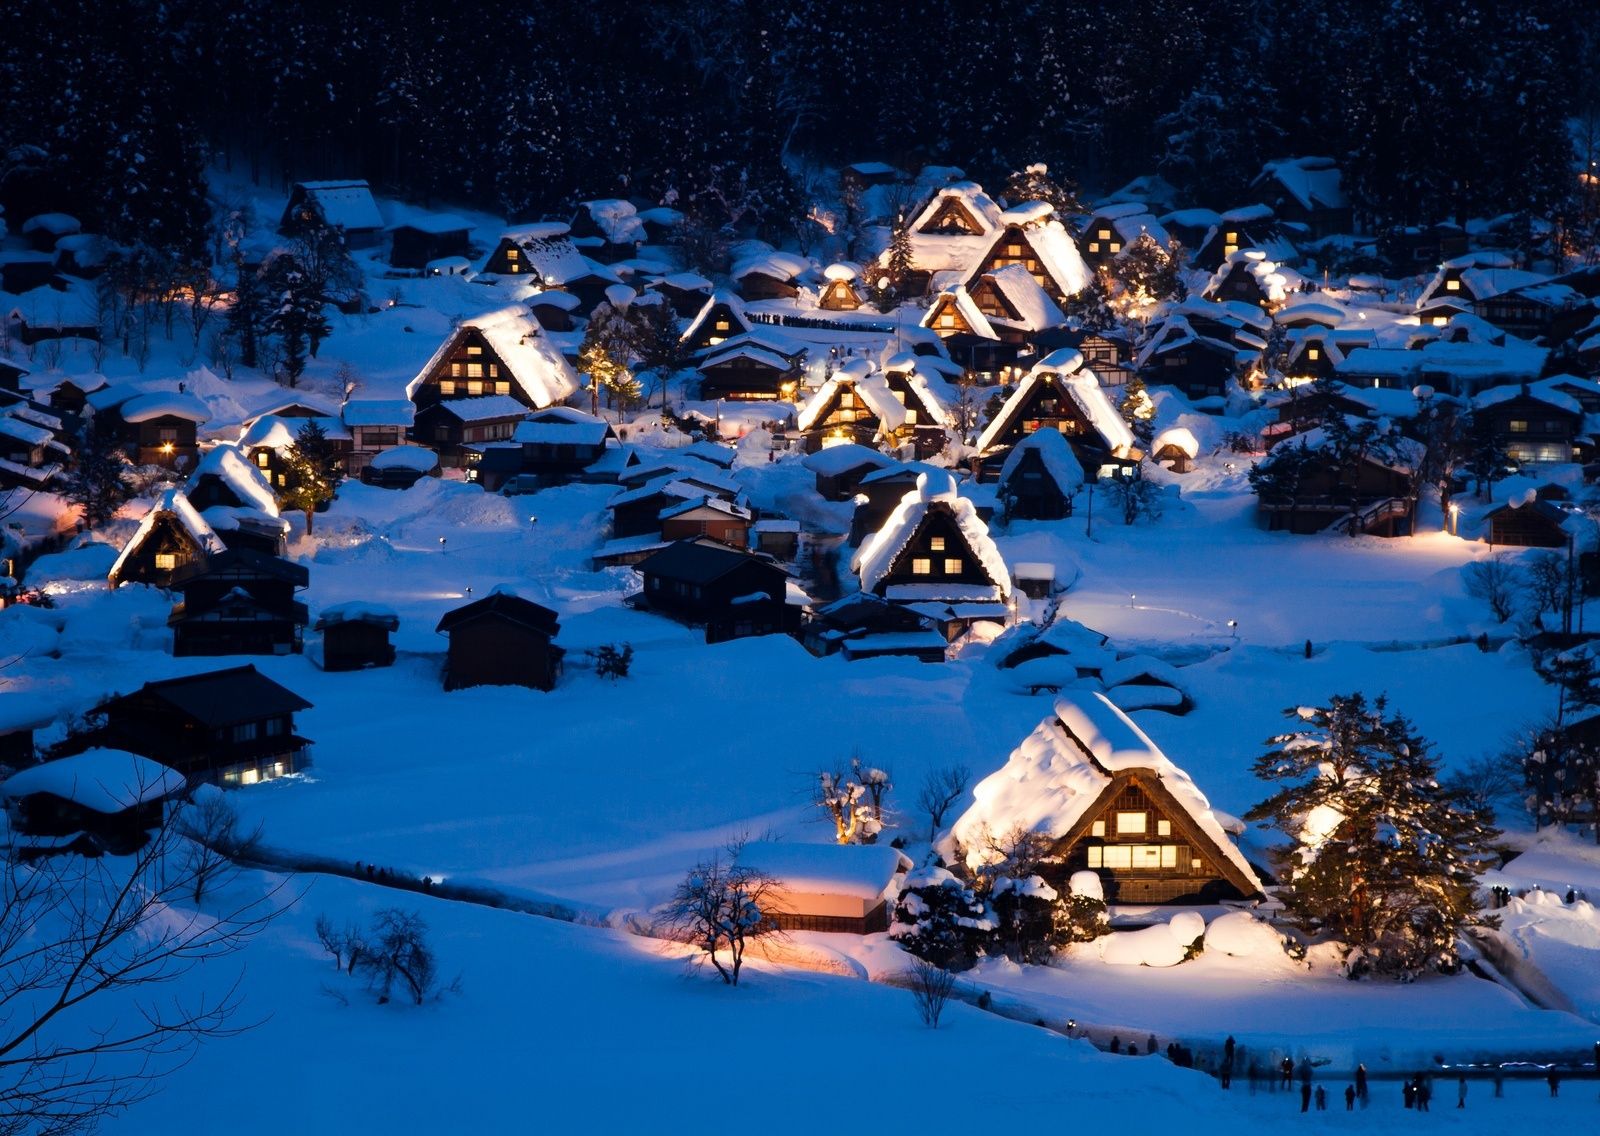 reasons you'll love winter in Japan